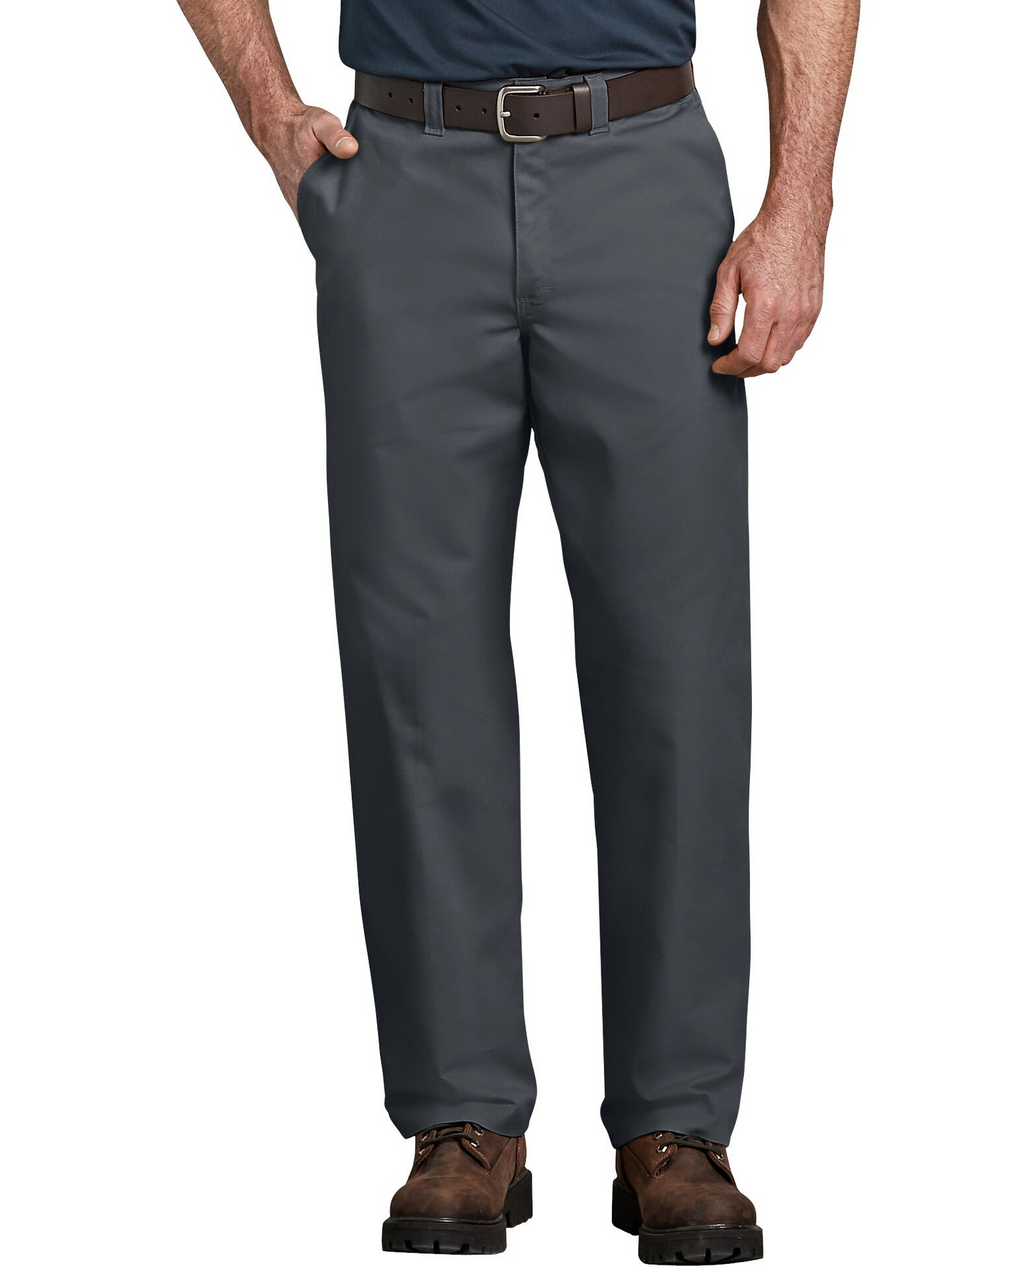 four times Dependence Reject Dickies [LP700] Premium Industrial Flat Front Comfort Waist Pant. Live